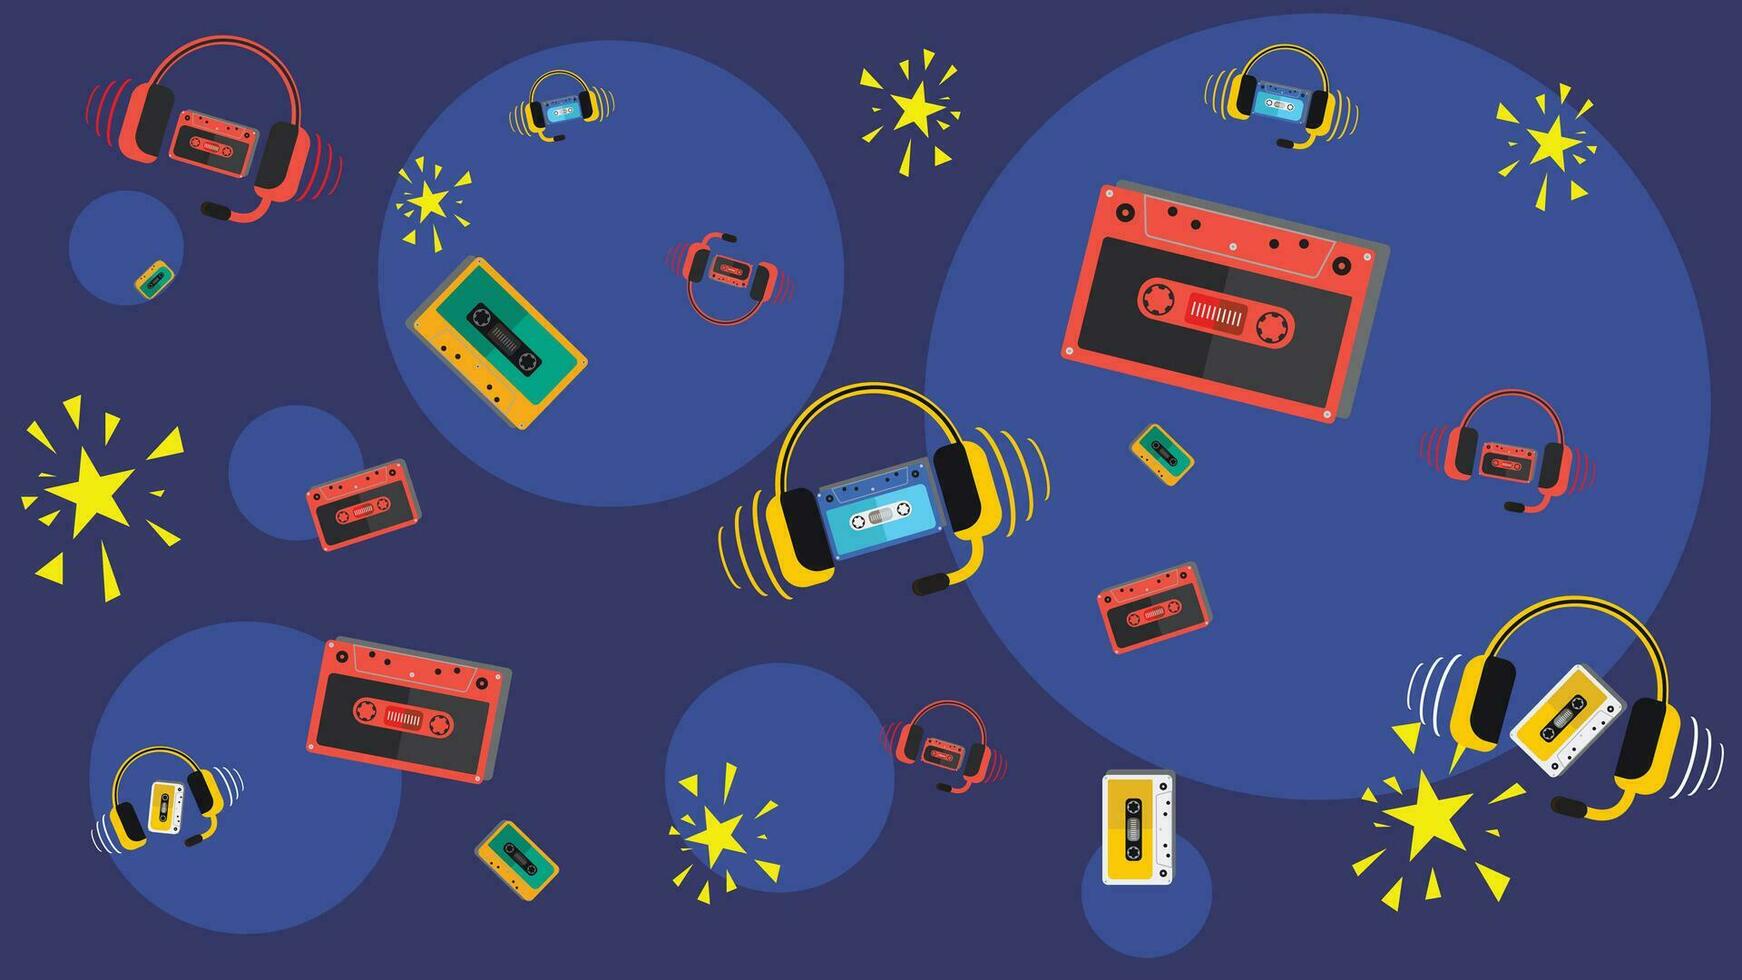 audio cassette tapes makes Pattern with retro style  vector illustration. 1990 style. suitable for background